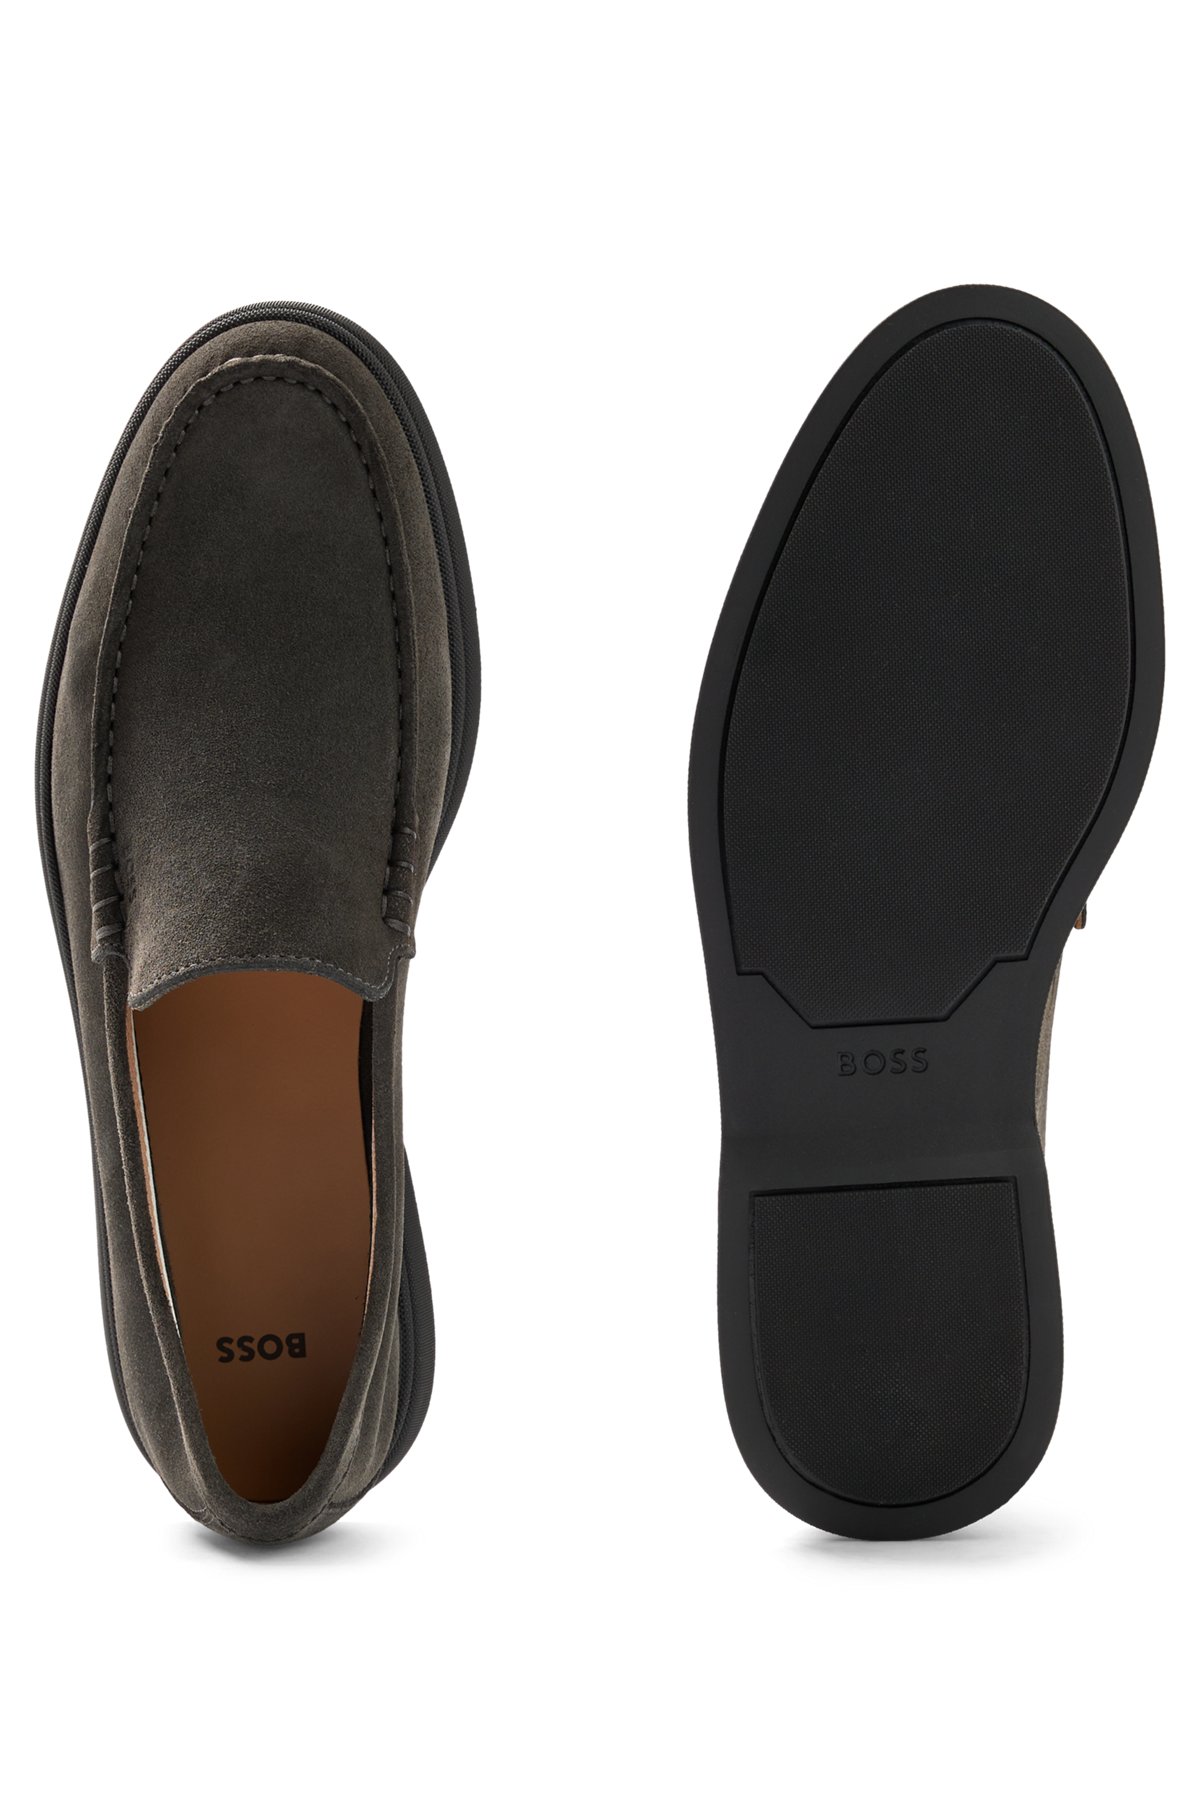 Suede moccasins with embossed logo, Dark Grey